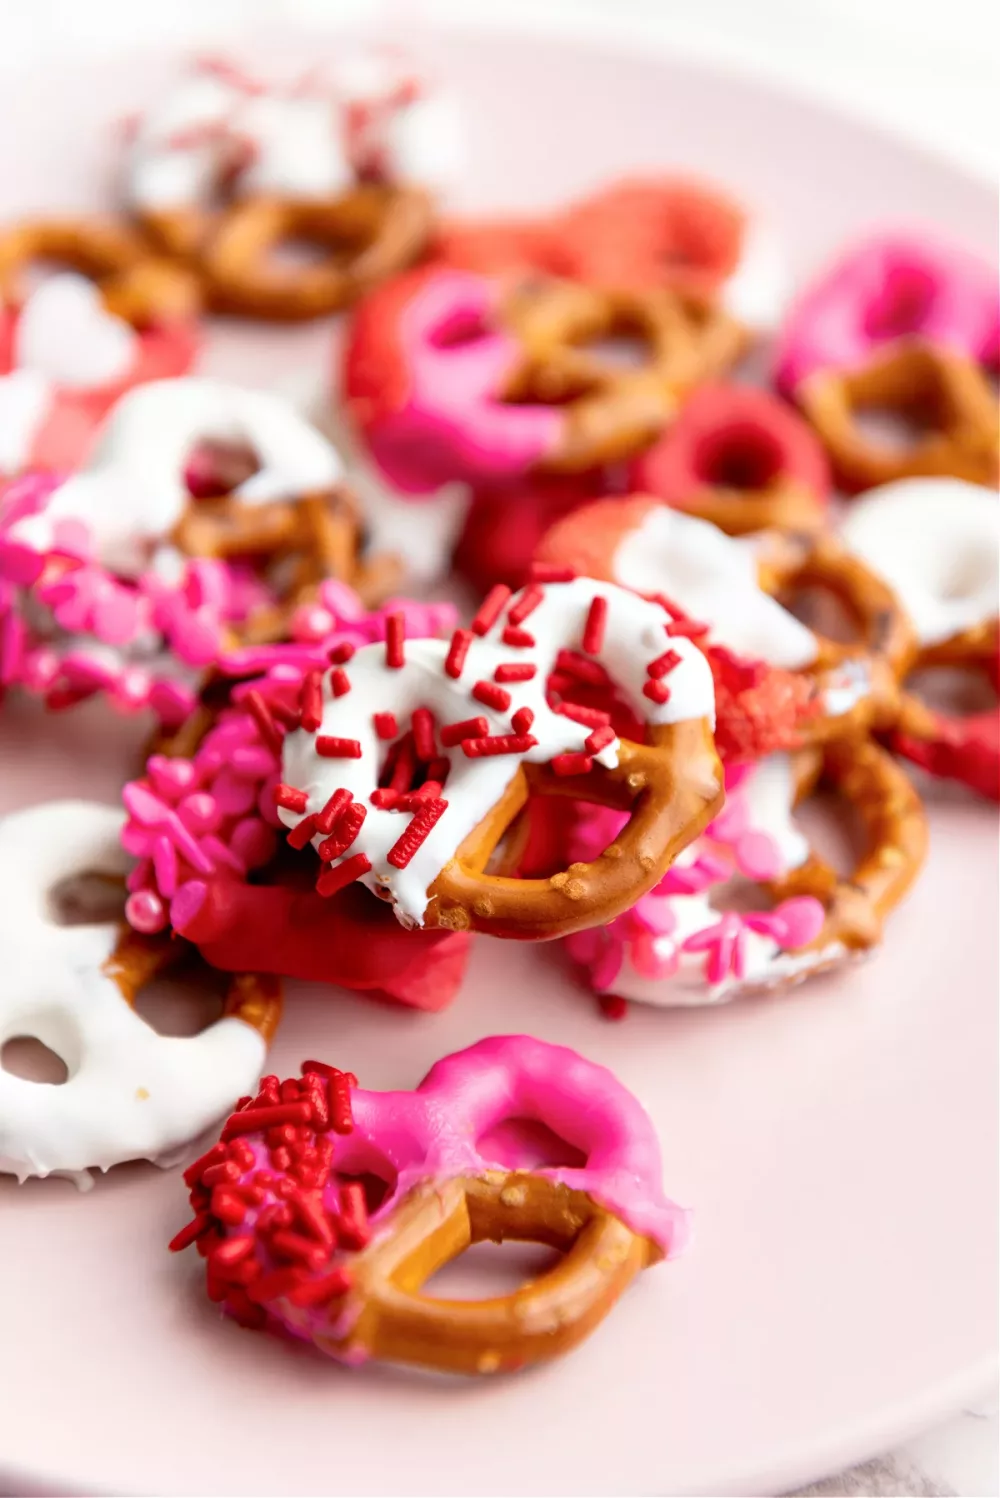 Pretzel Candy Recipes: Pretzel covered in white chocolate and sprinkled with red and pink sugar and sprinkles